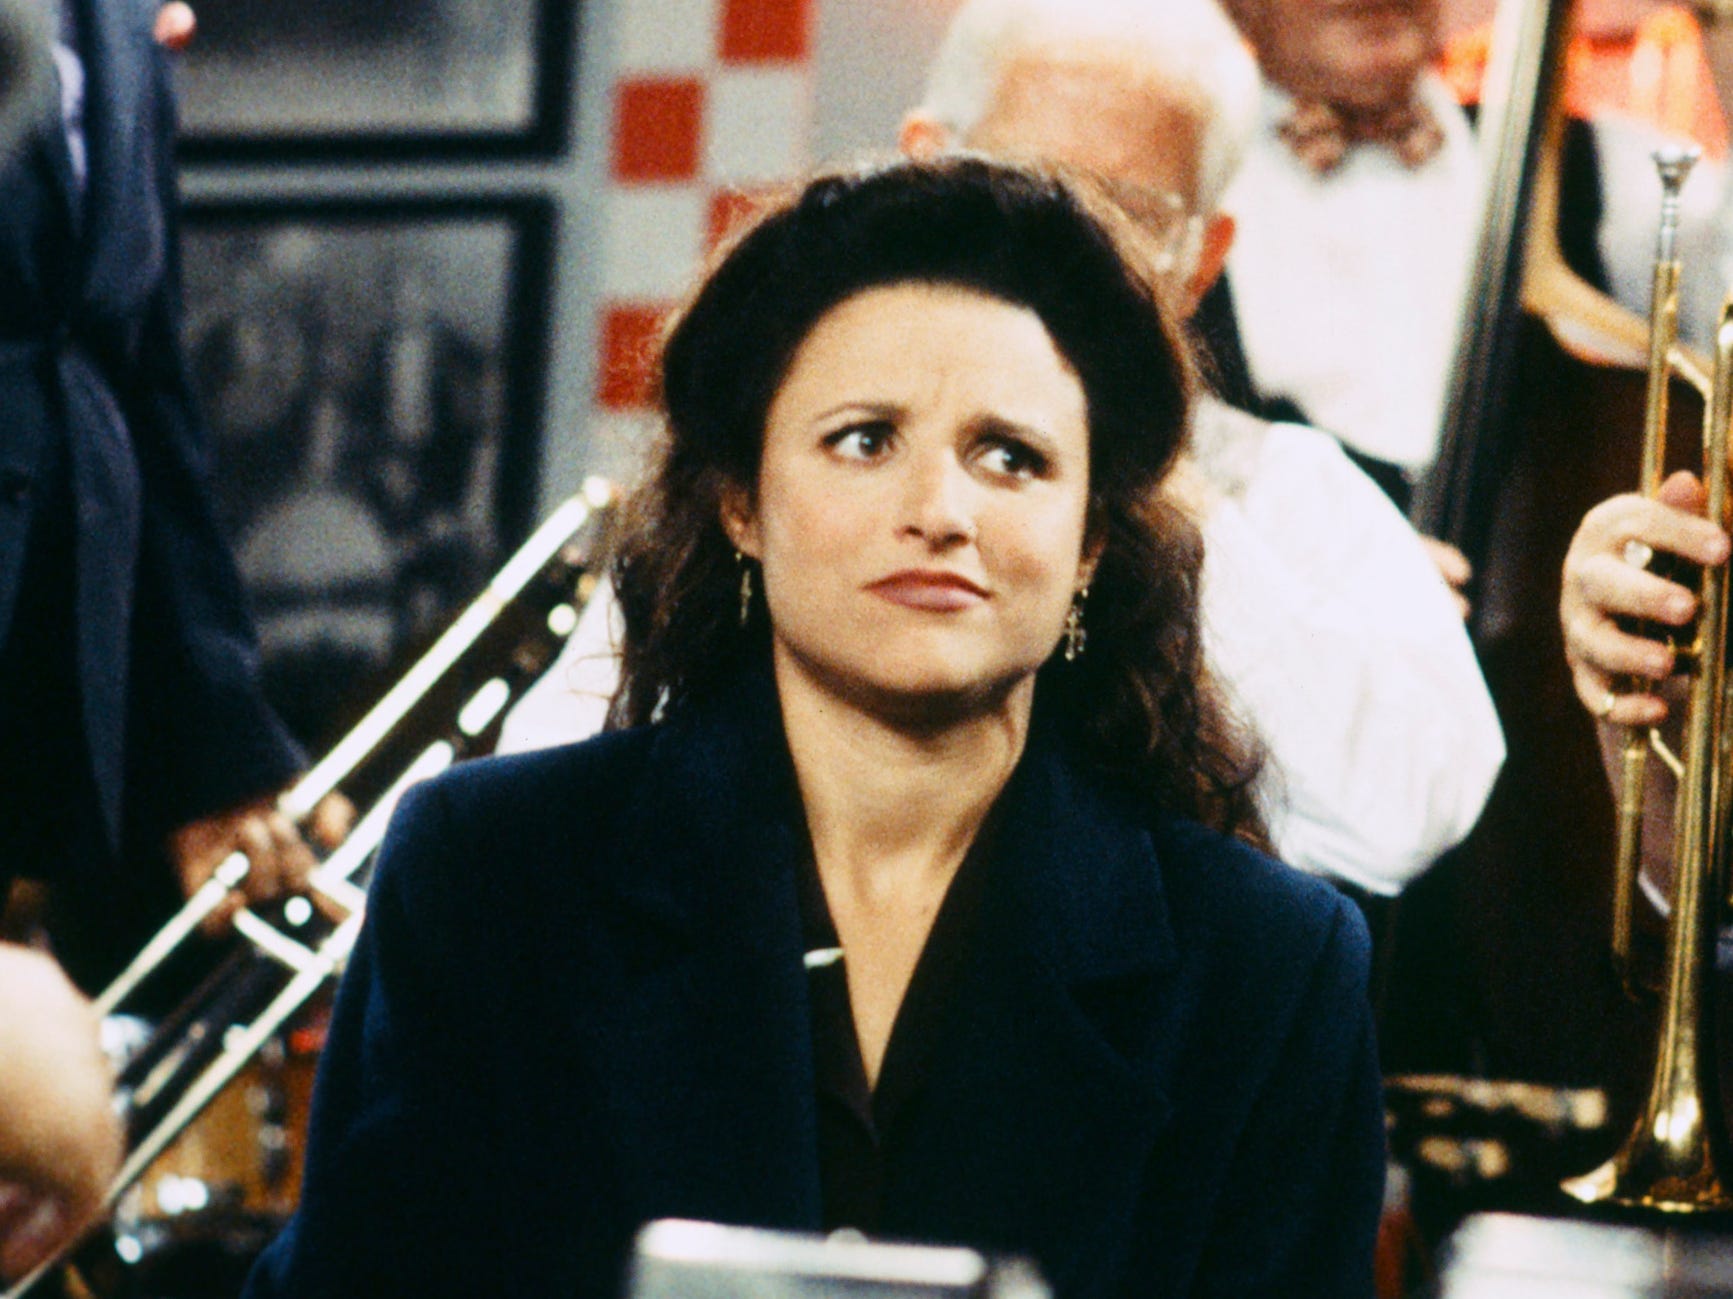 <p>Prior to winning audiences over for her portrayal of Seinfeld's ex-turned-buddy, Louis-Dreyfus spent <a href="https://www.imdb.com/name/nm0000506/">three seasons</a> as a cast member on NBC's iconic sketch-comedy series "<a href="https://www.businessinsider.com/stars-who-got-rejected-by-saturday-night-live">Saturday Night Live</a>."</p>